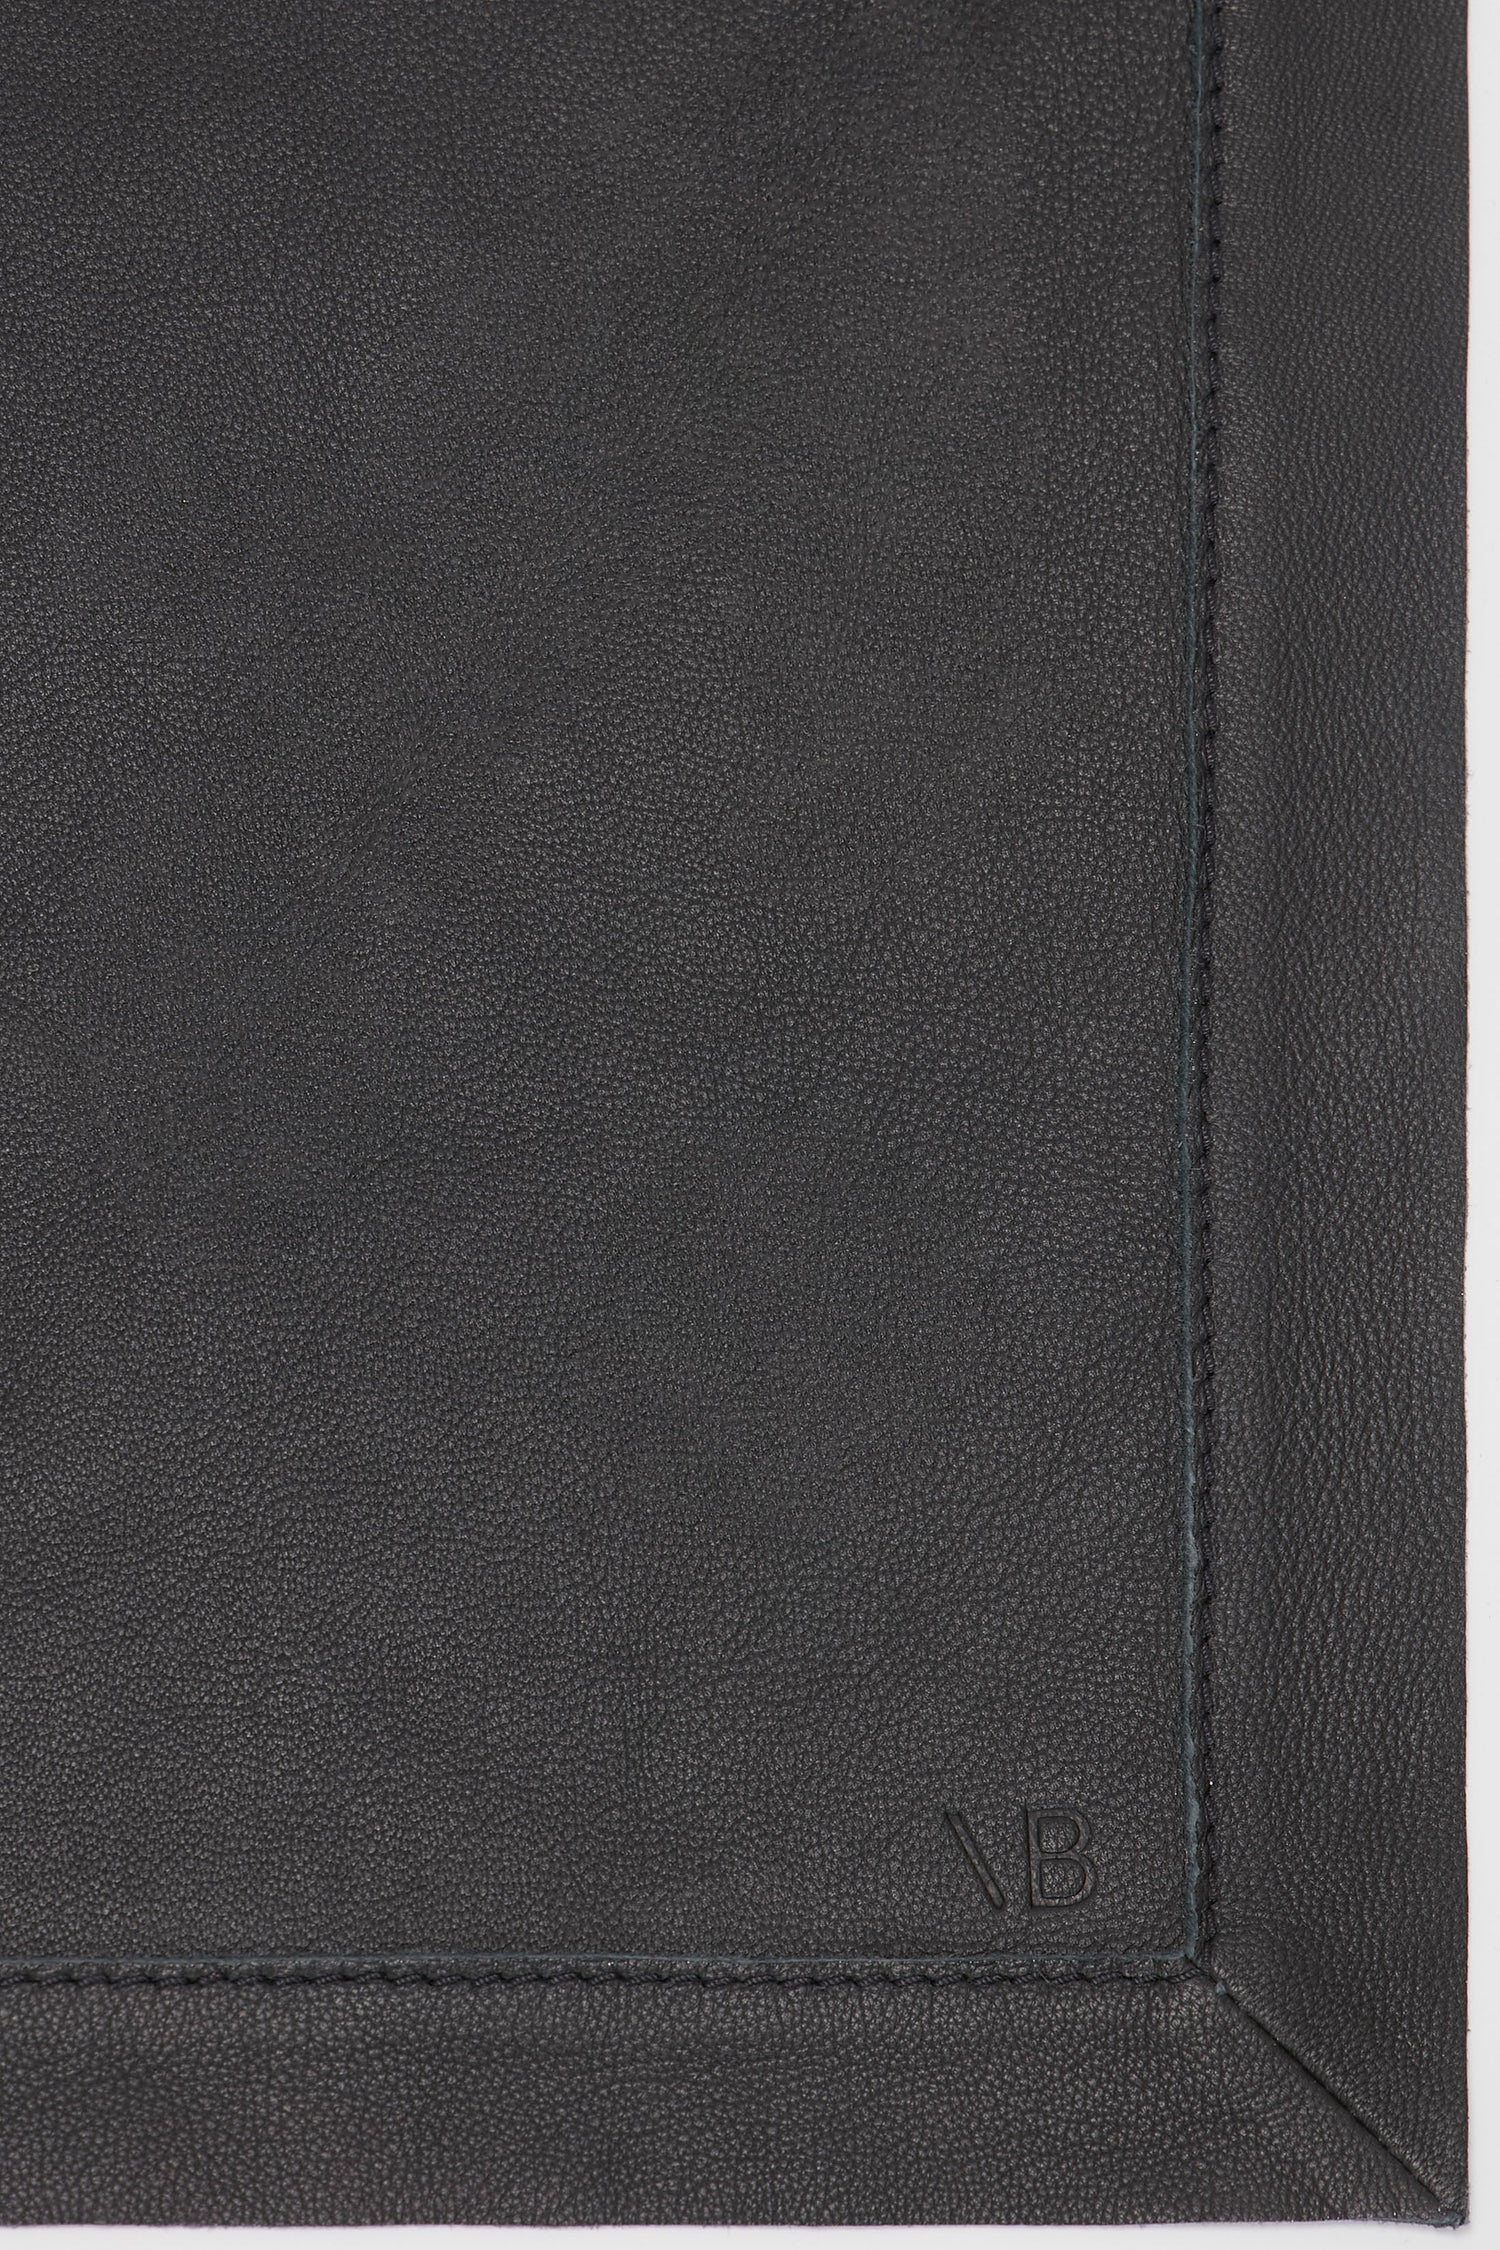 Close-up of a Victoria Beckham Foulard In Black Leather with a subtle embossed logo at the bottom and visible stitching on the sides.